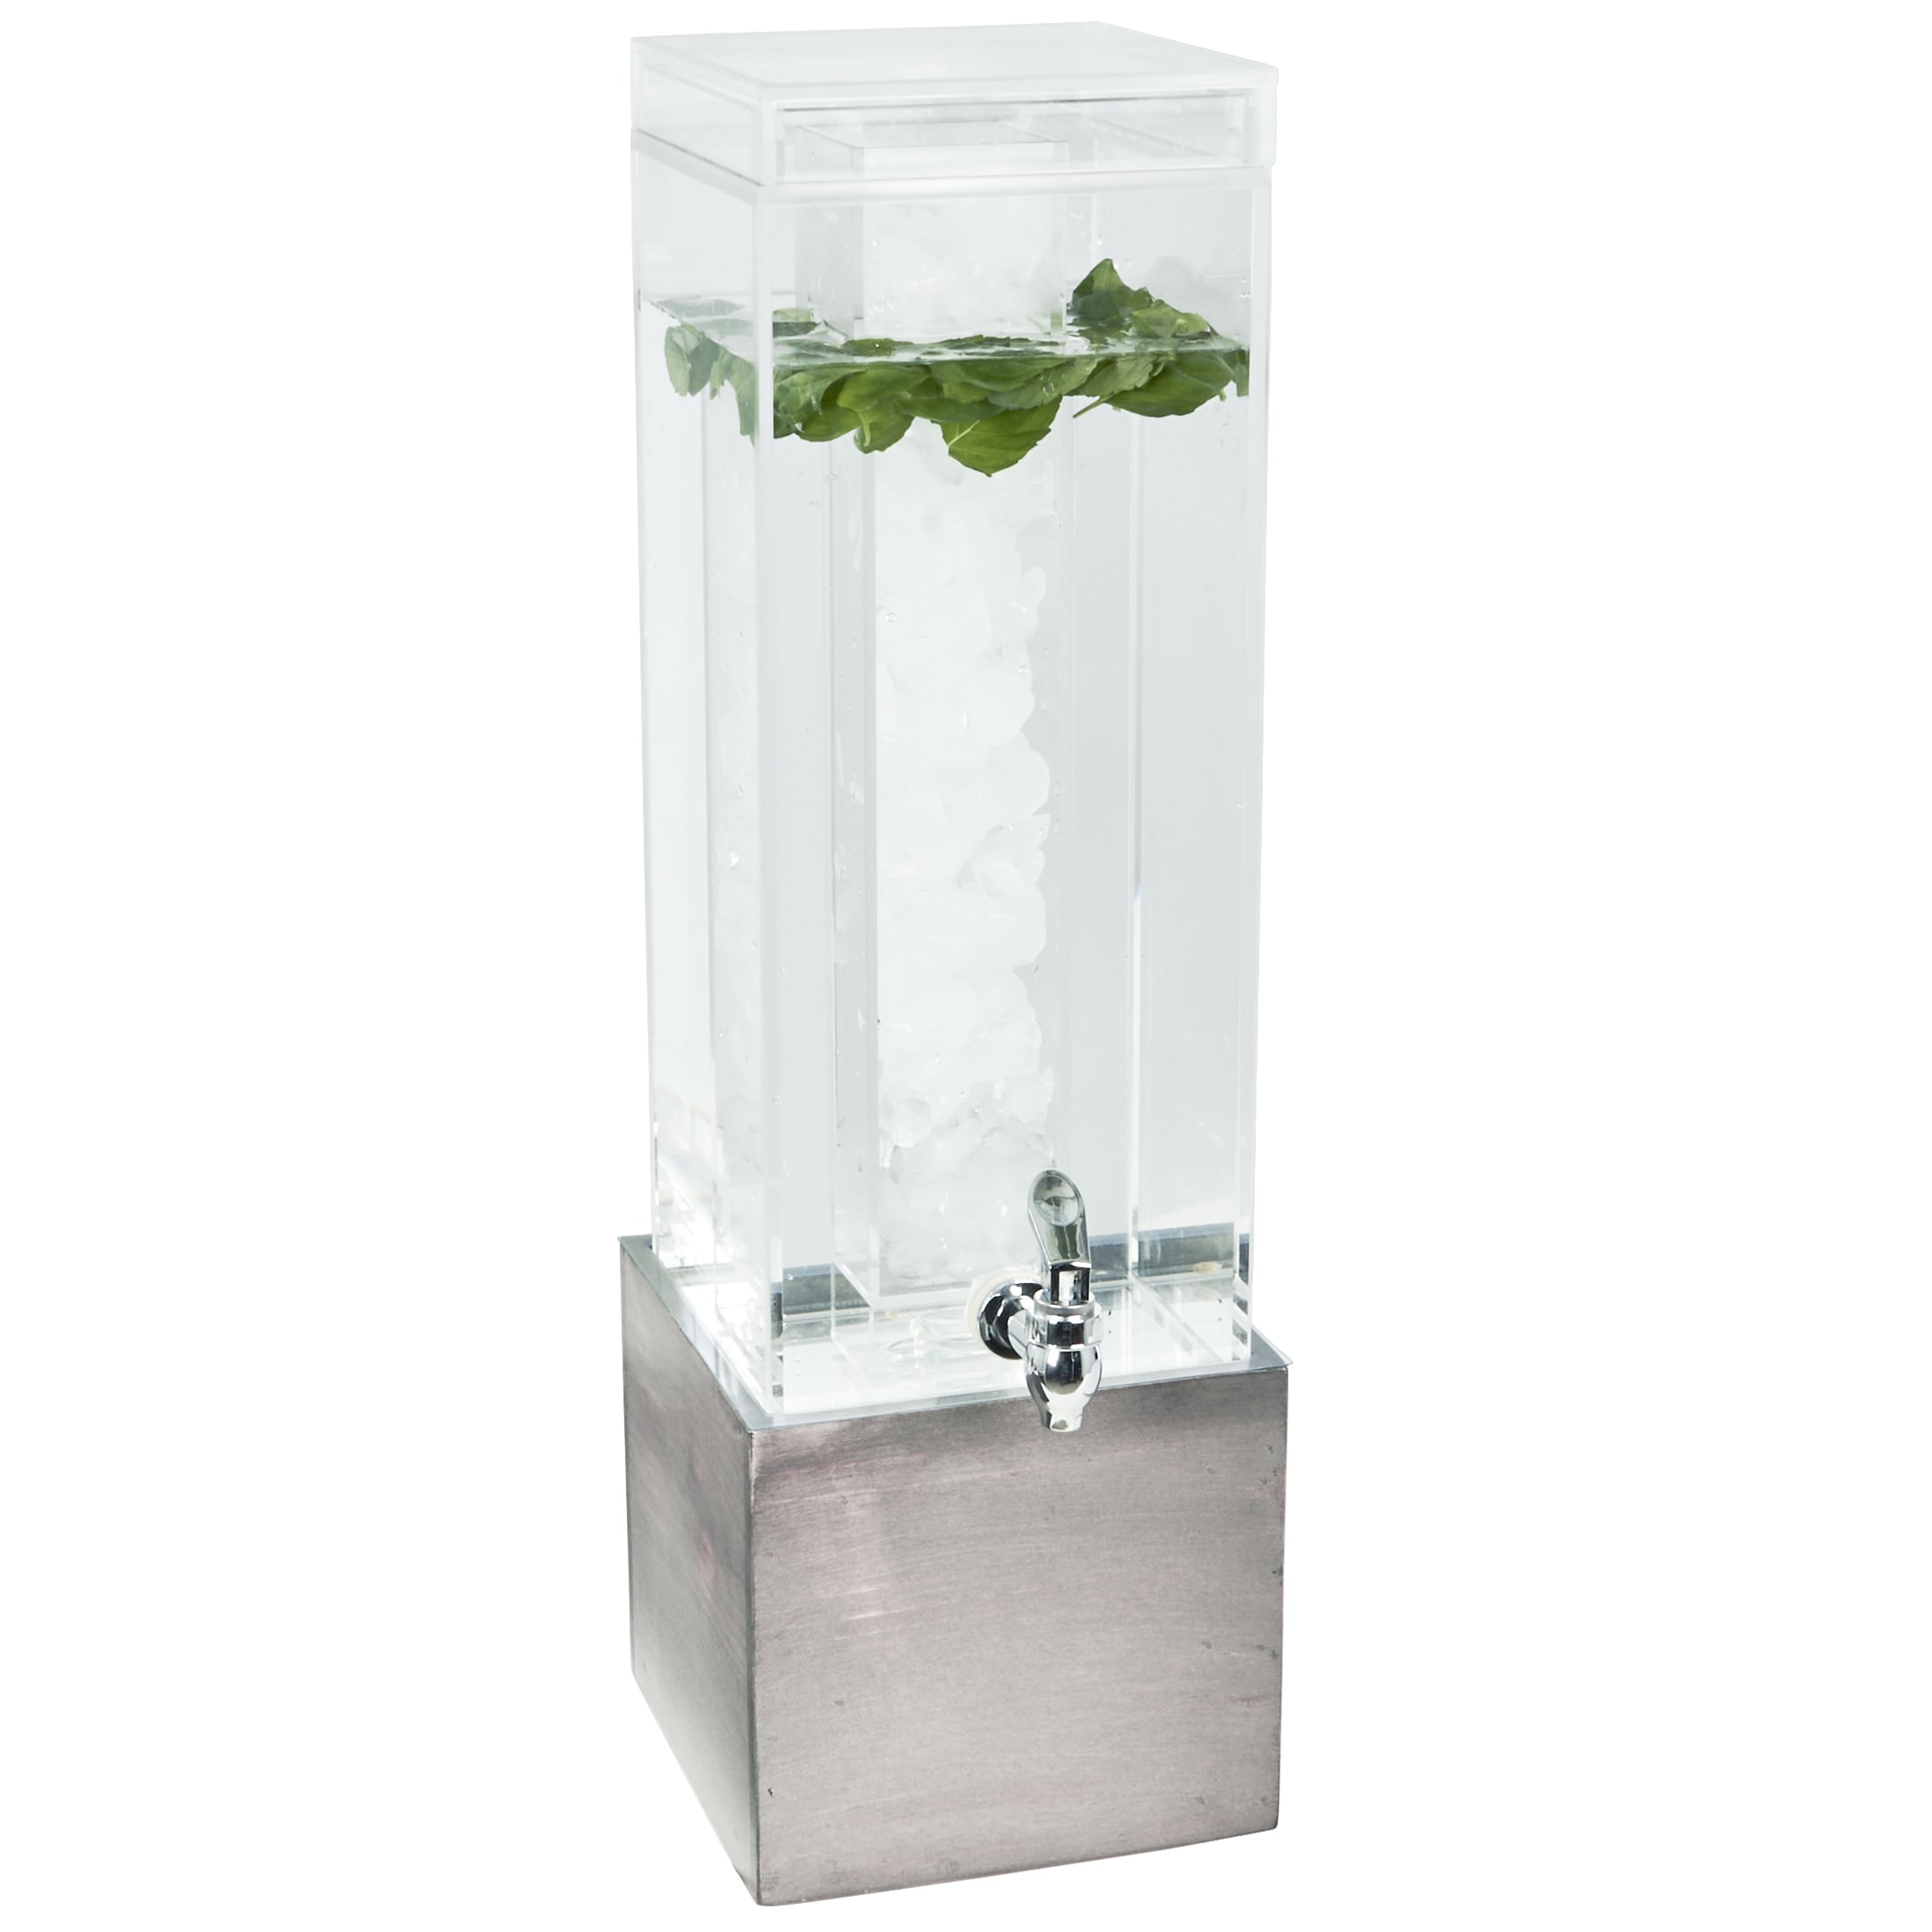 Cal-Mil 1527-3-110 gal Beverage Dispenser w/ Ice Chamber  Drip Tray  Clear Plastic Container/Gray Washed Base